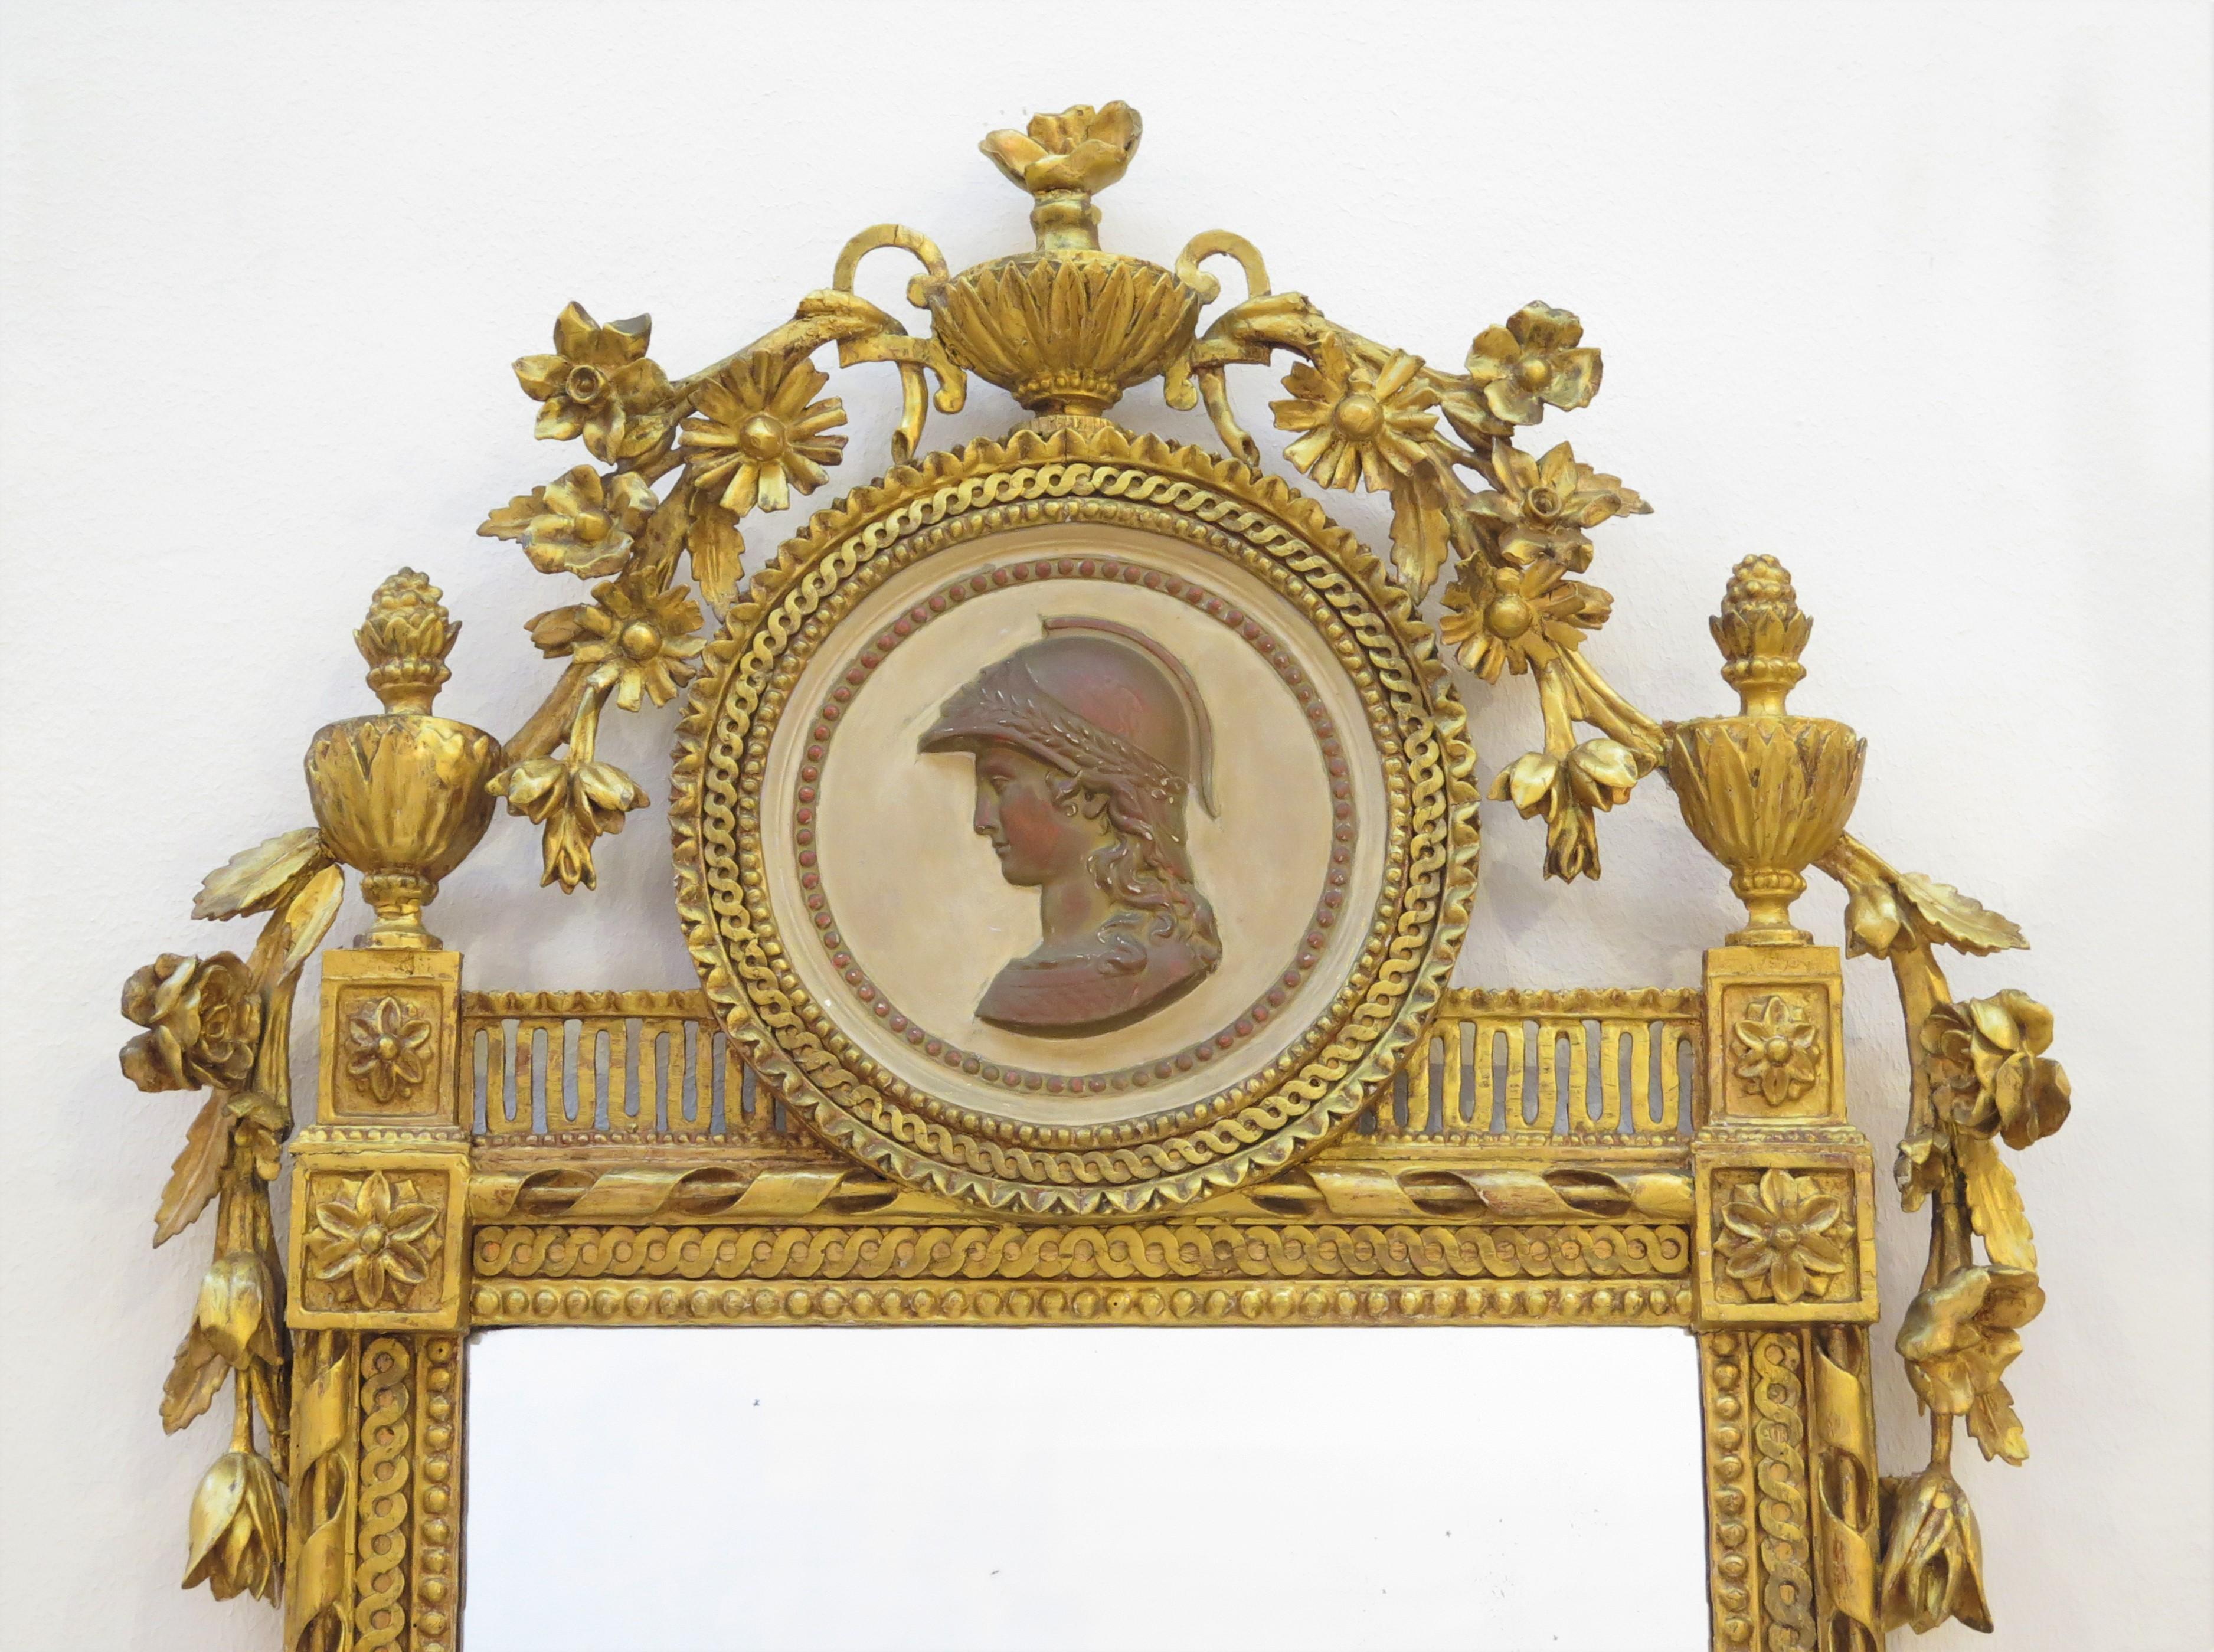 a Neoclassical giltwood pier glass / pier mirror adorned with a round bas-relief portrait medallion (terra cotta in color) of a Roman soldier at its crest, topped and flanked by leafy urns and having flowering vines (with leaves) throughout its very